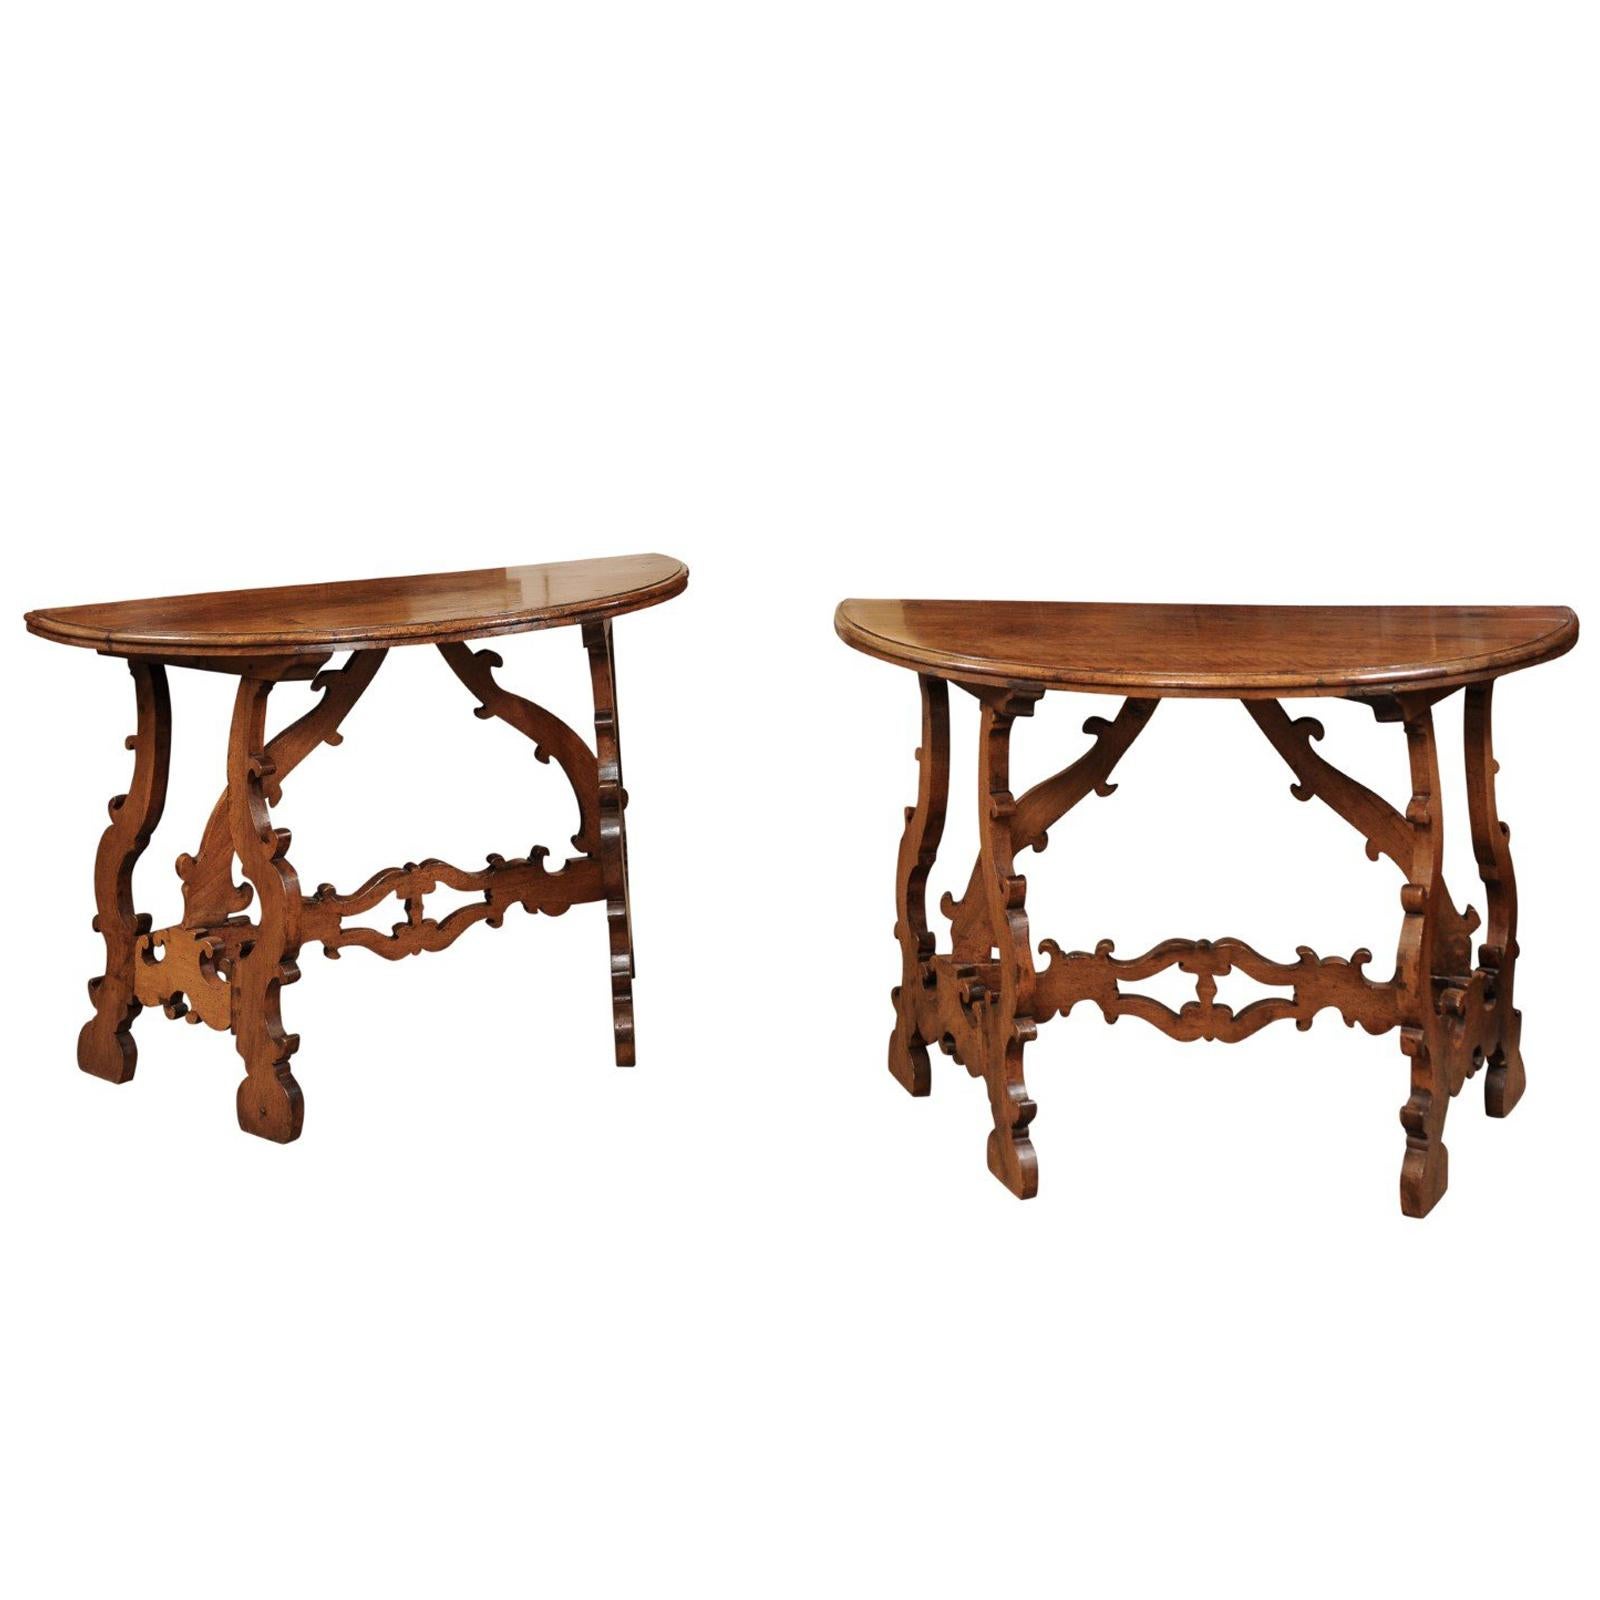 Pair of 18th Century Italian Walnut Demilune Consoles with Lyre Shaped Legs